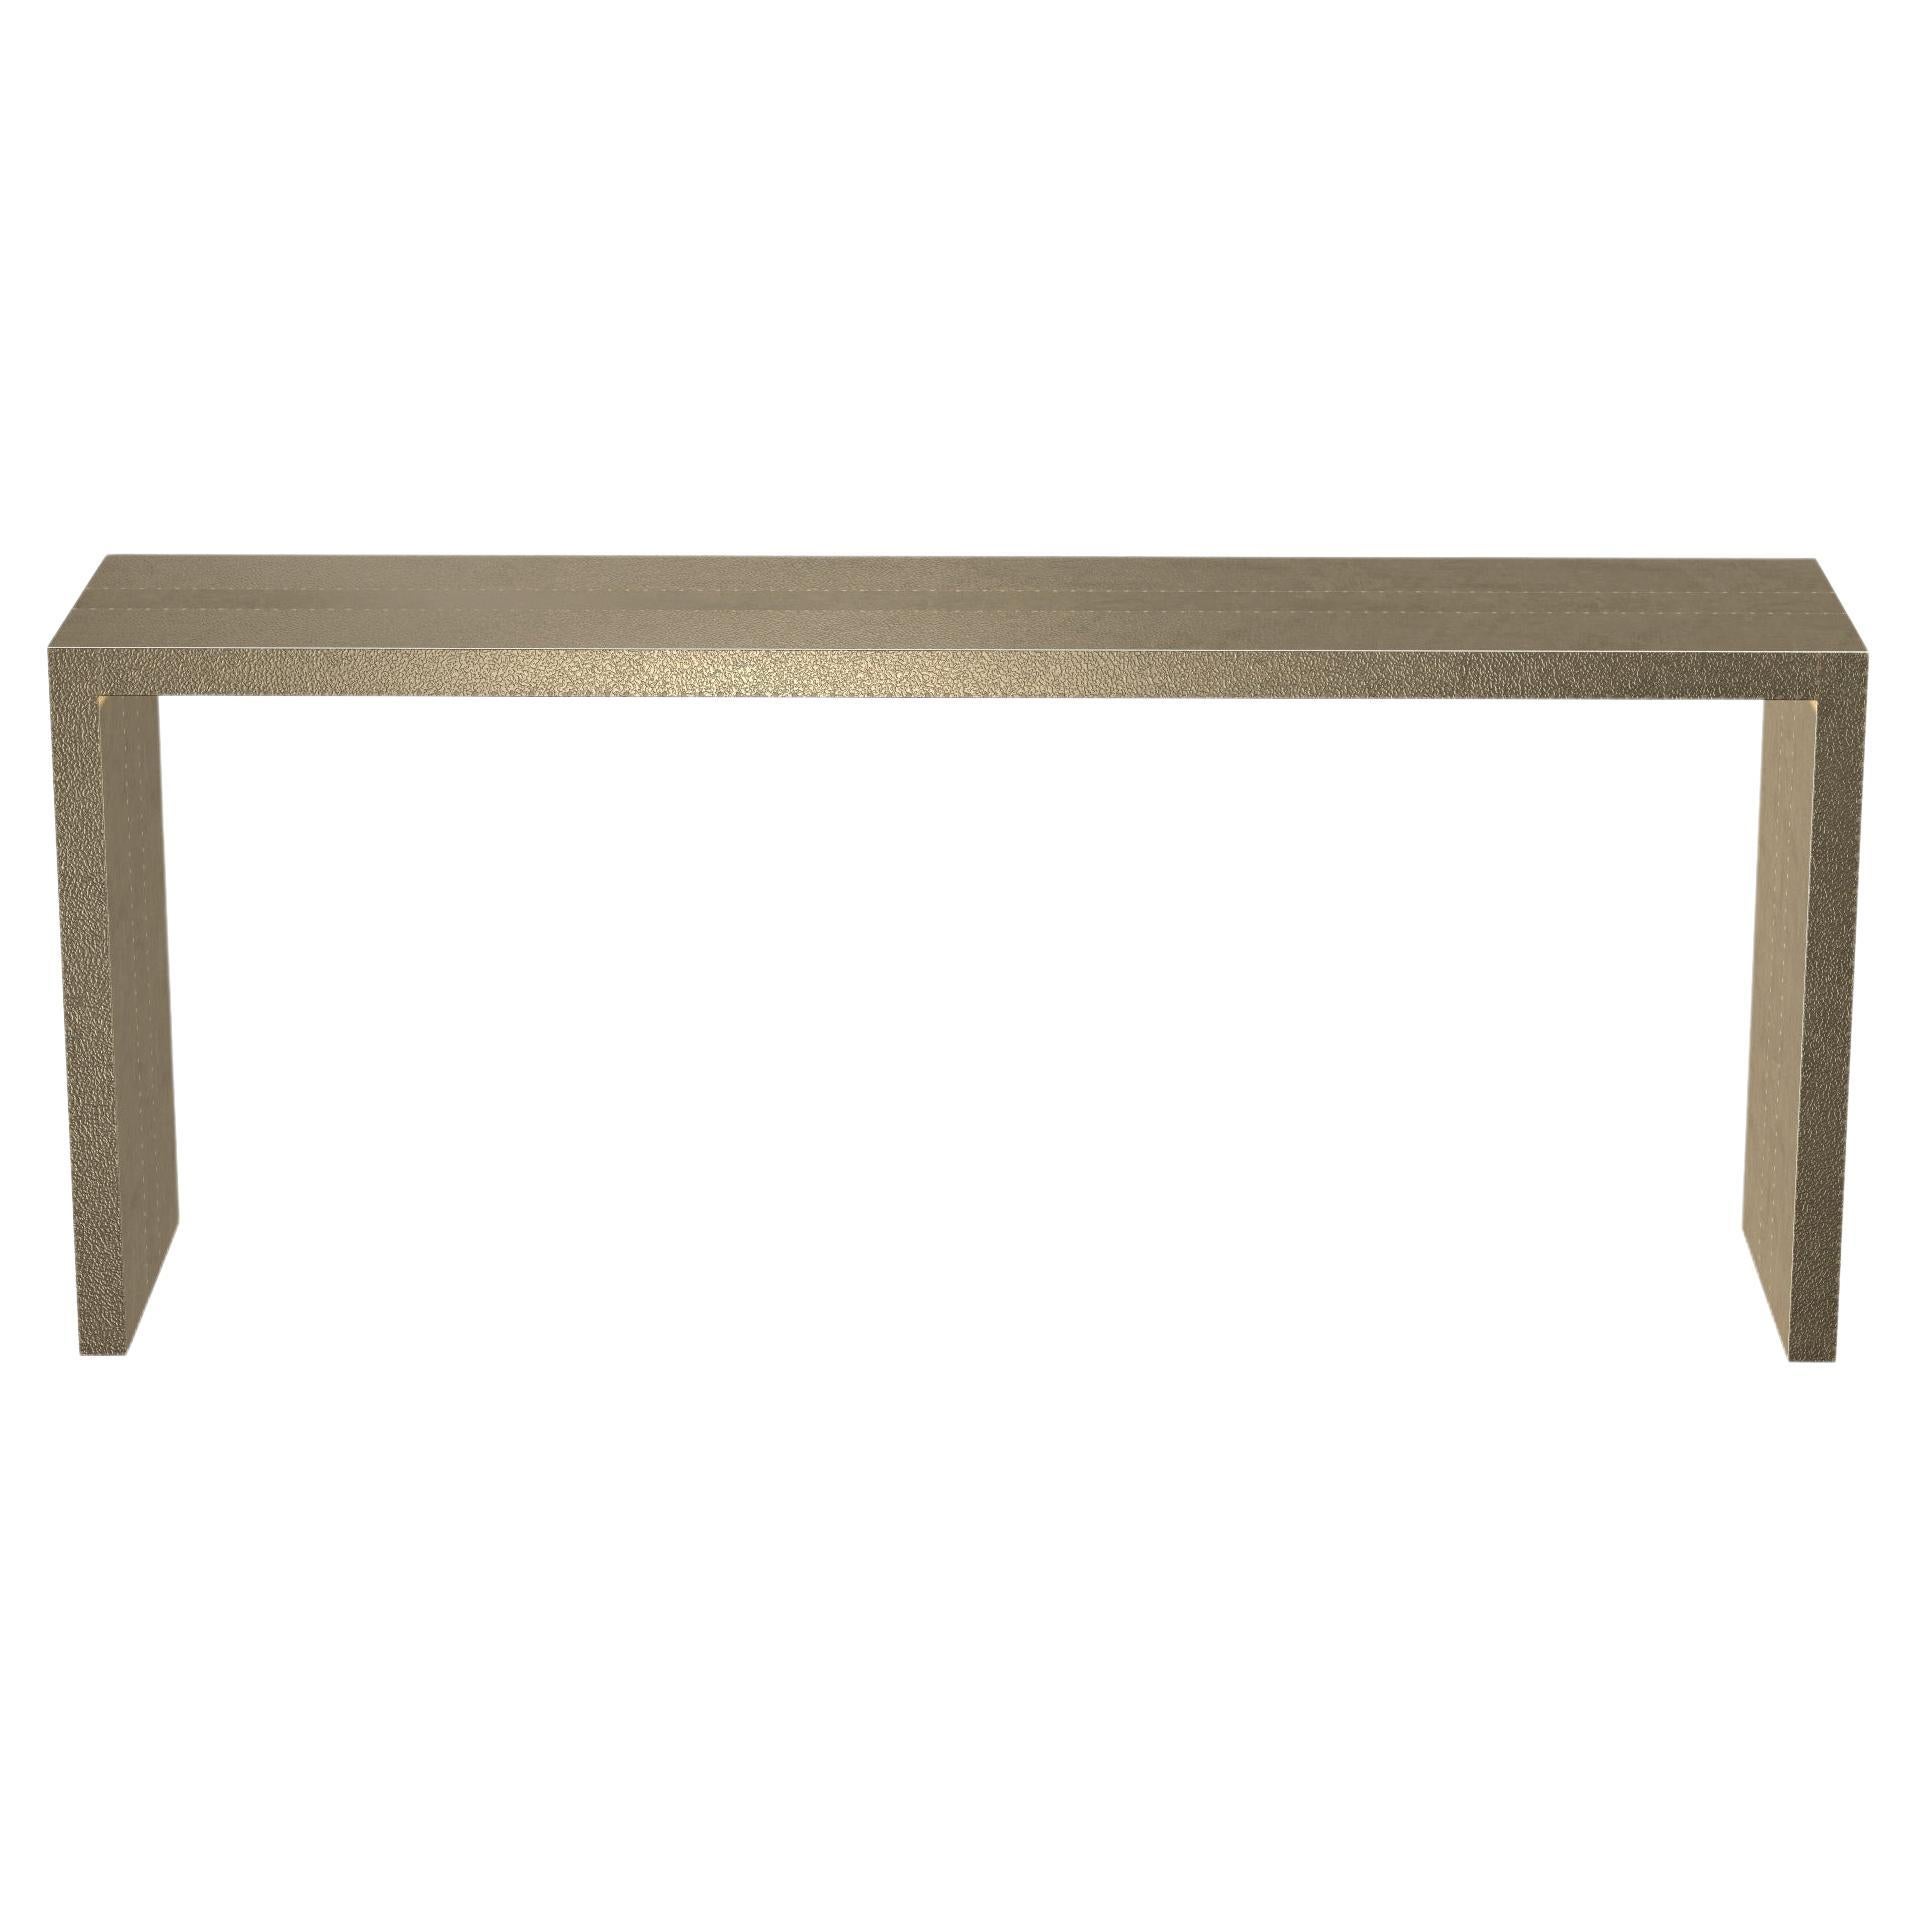 Art Nouveau Tray Console Tables in Copper Fine Hammered by Alison Spear For Sale